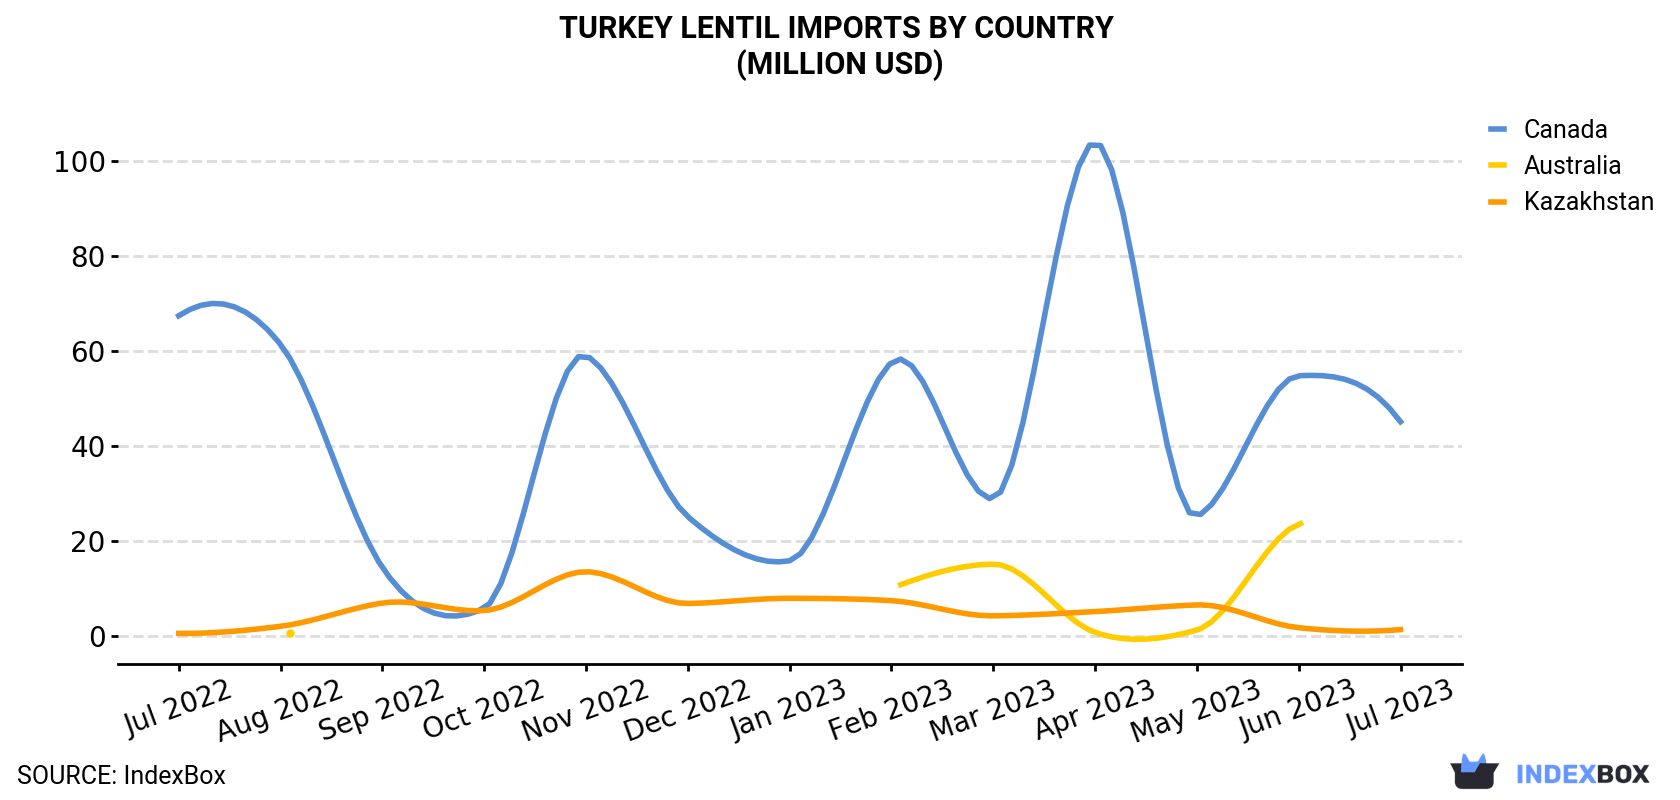 Turkey Lentil Imports By Country (Million USD)